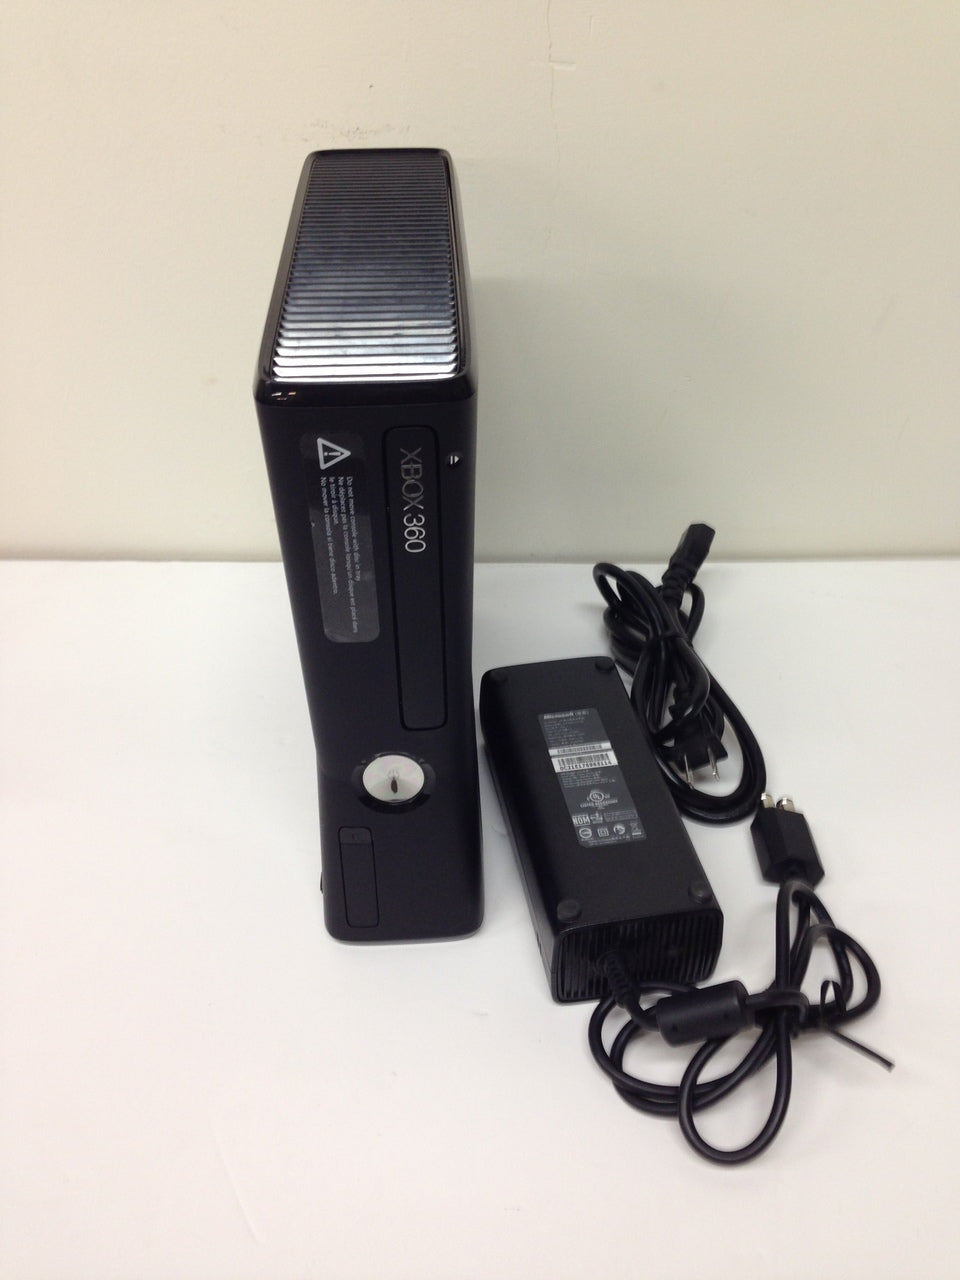 Microsoft Xbox 360 S 4gb Console With Kinect Sensor Gaming And